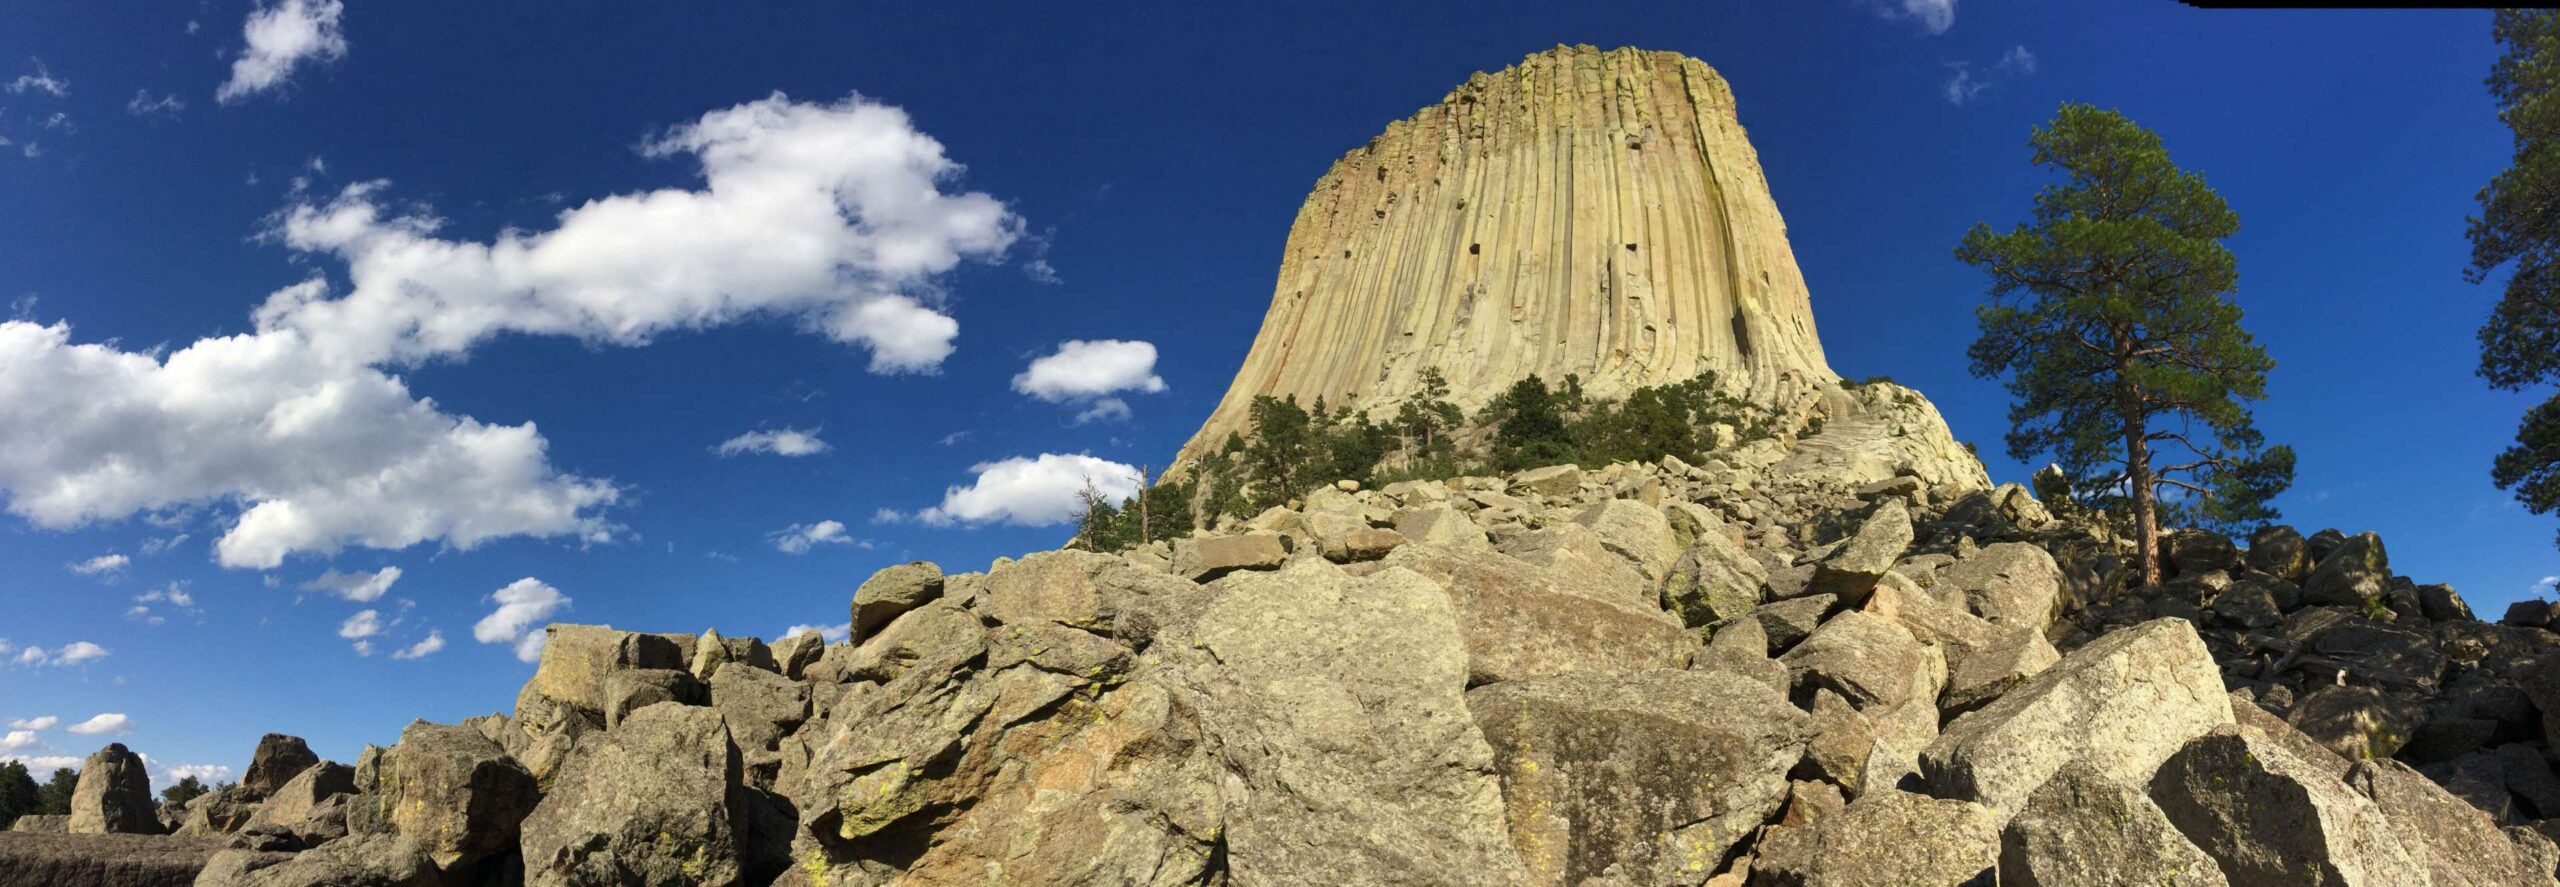 Devils tower, panoramic view k wallpapers and backgrounds